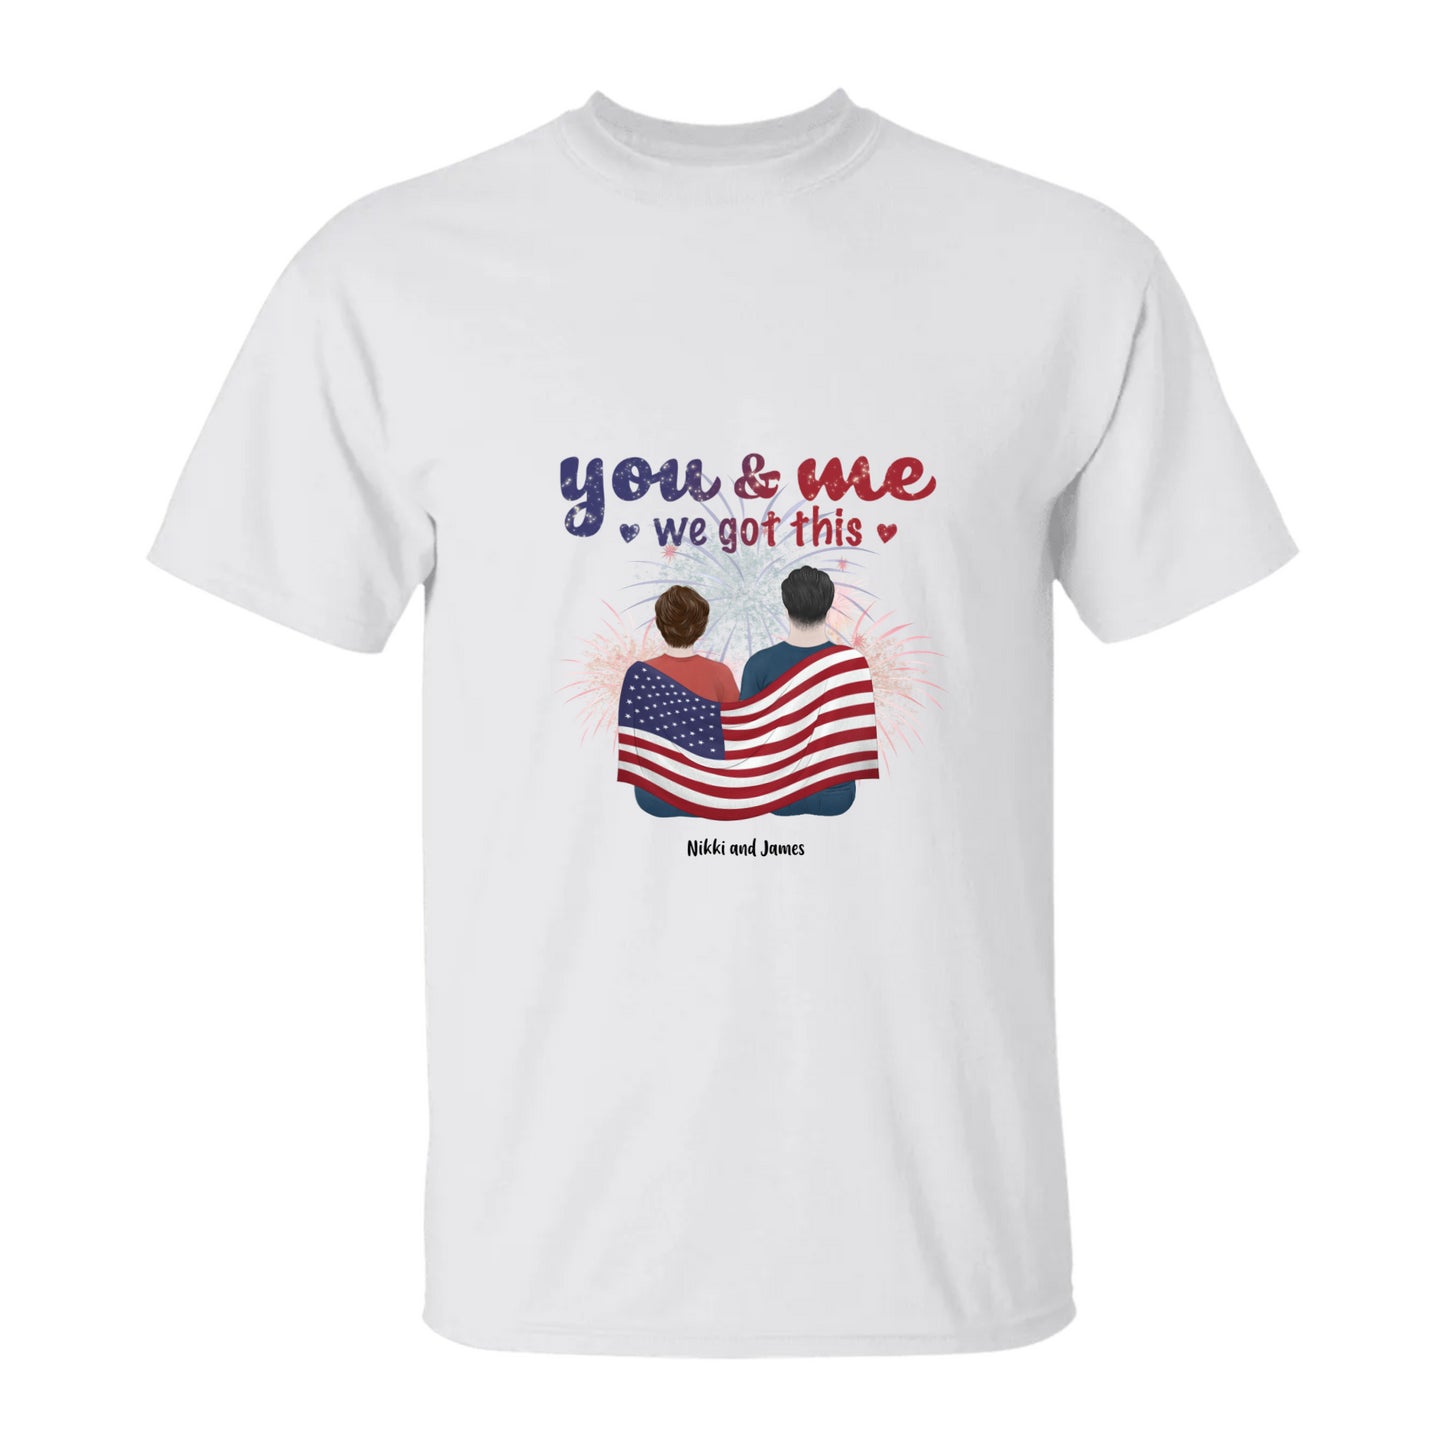 We've Got This 4th of July Couples T-Shirt